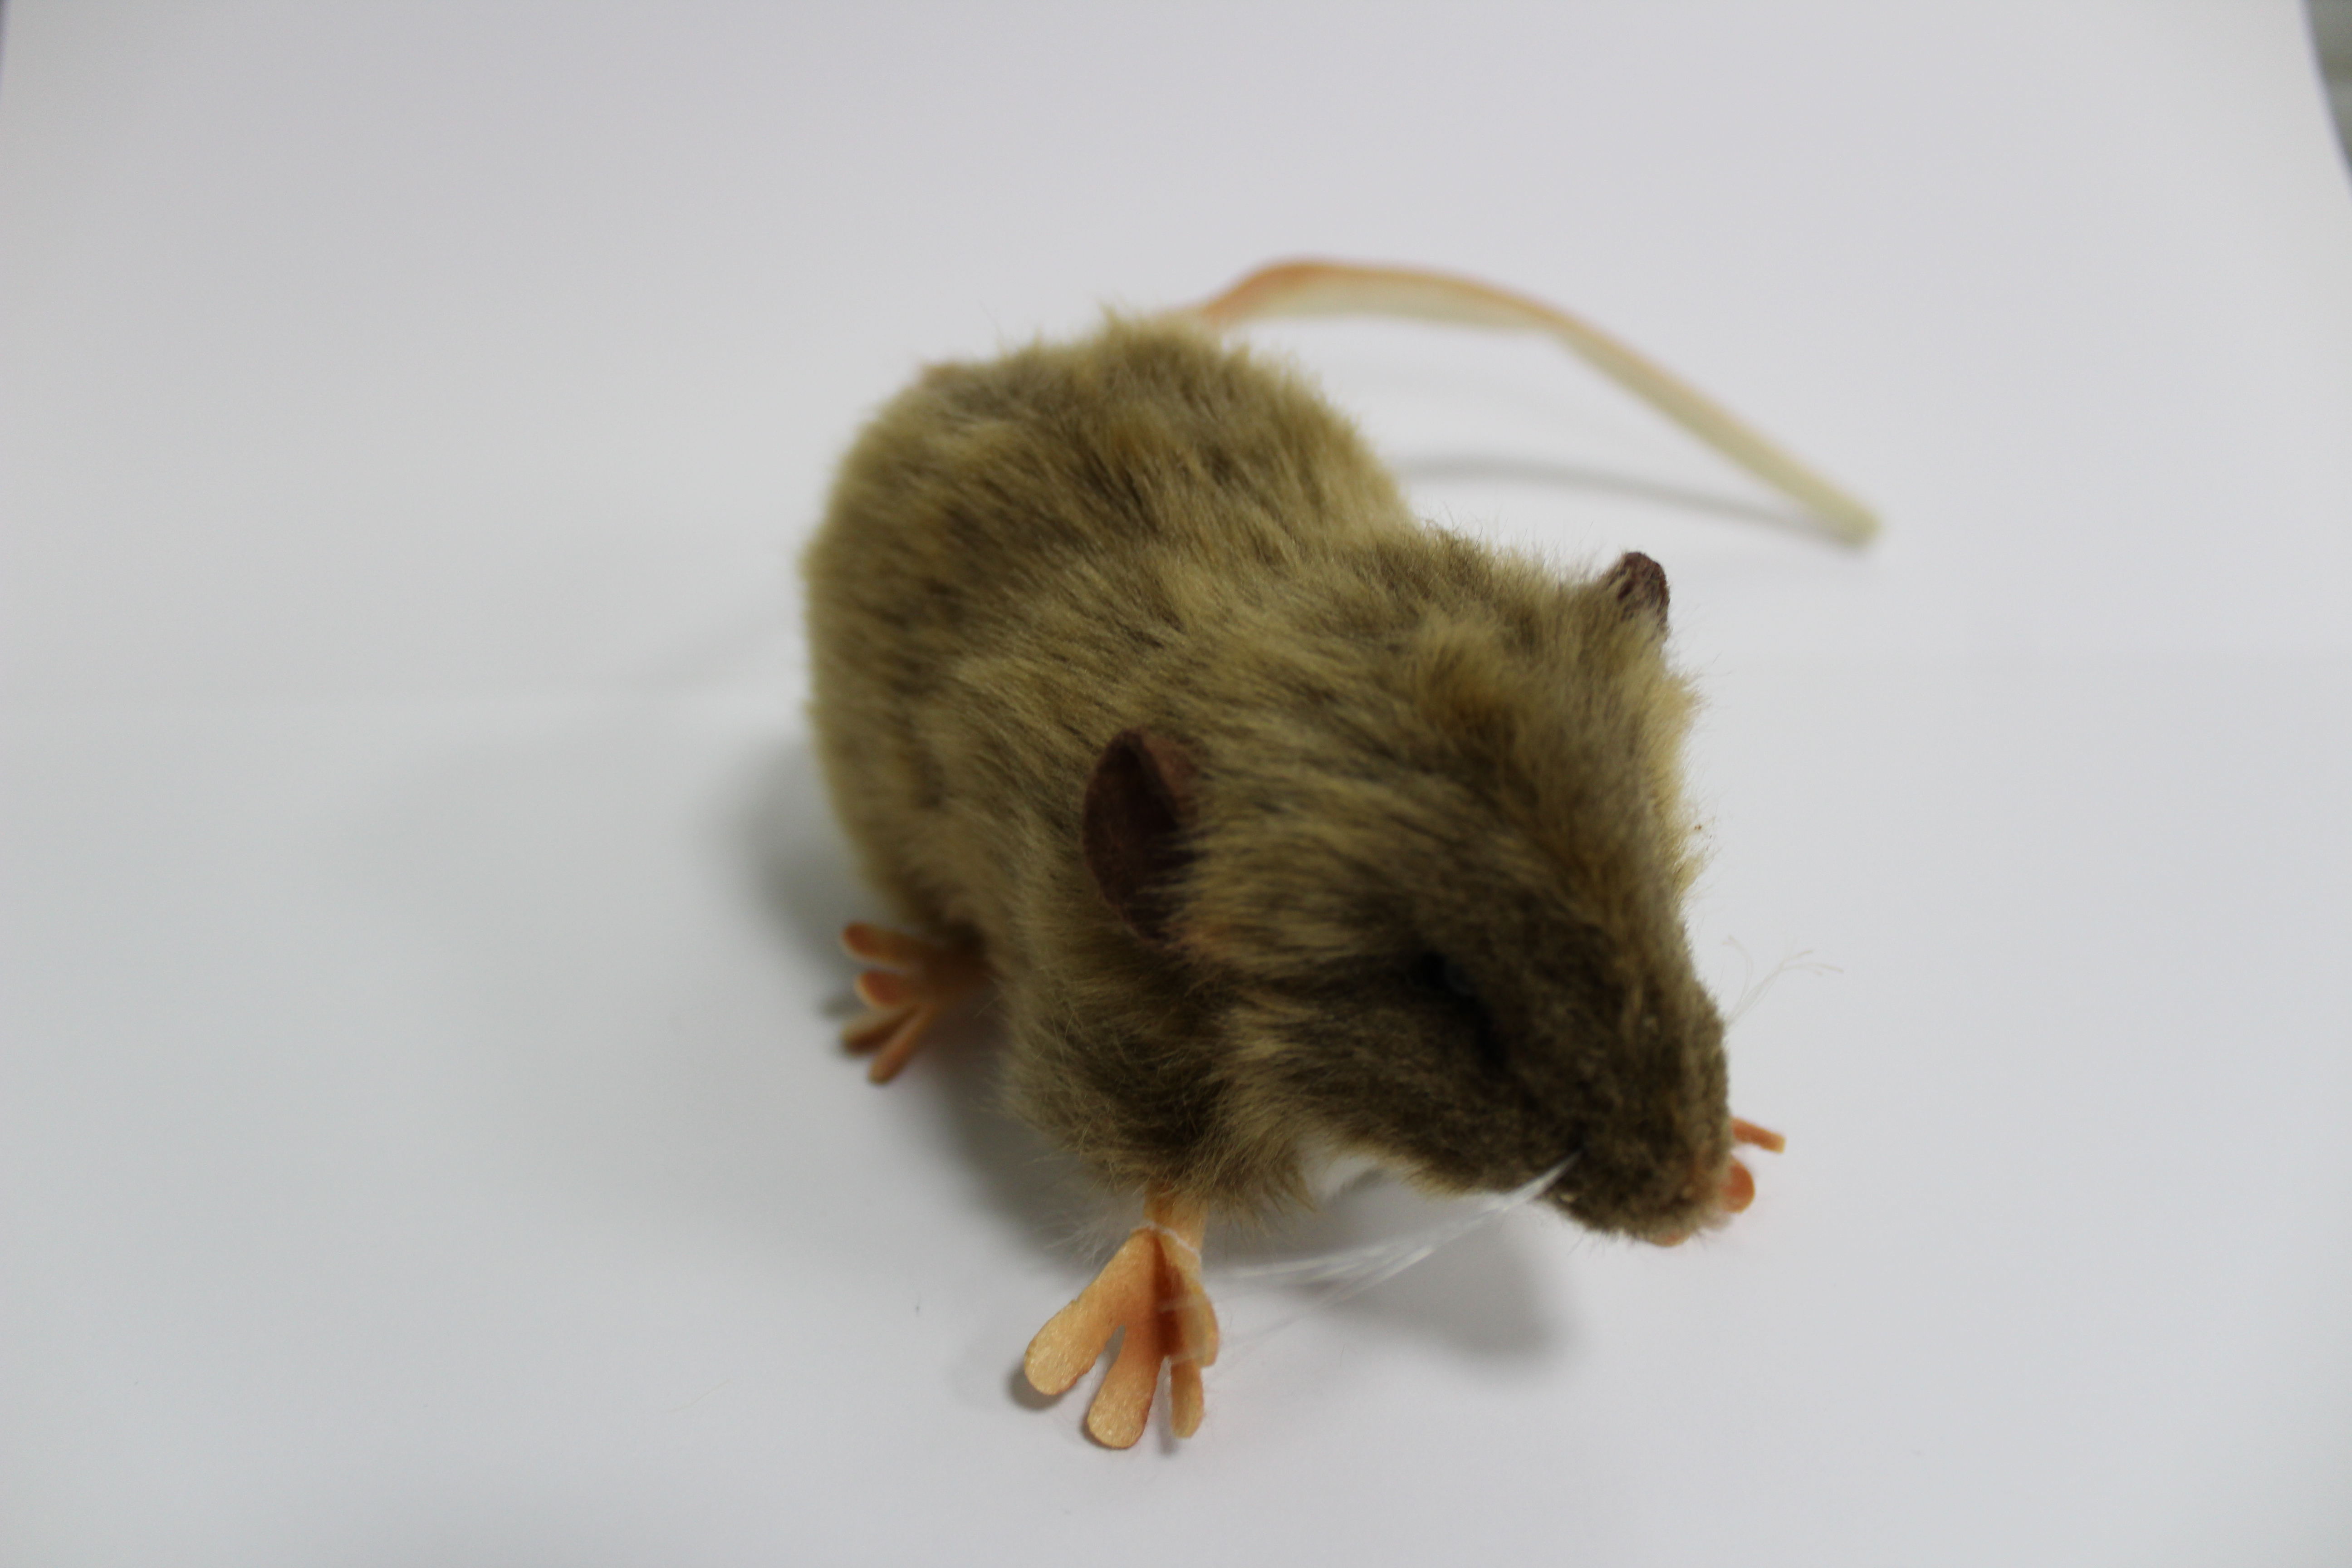 The toy rat on sale at The National Archives